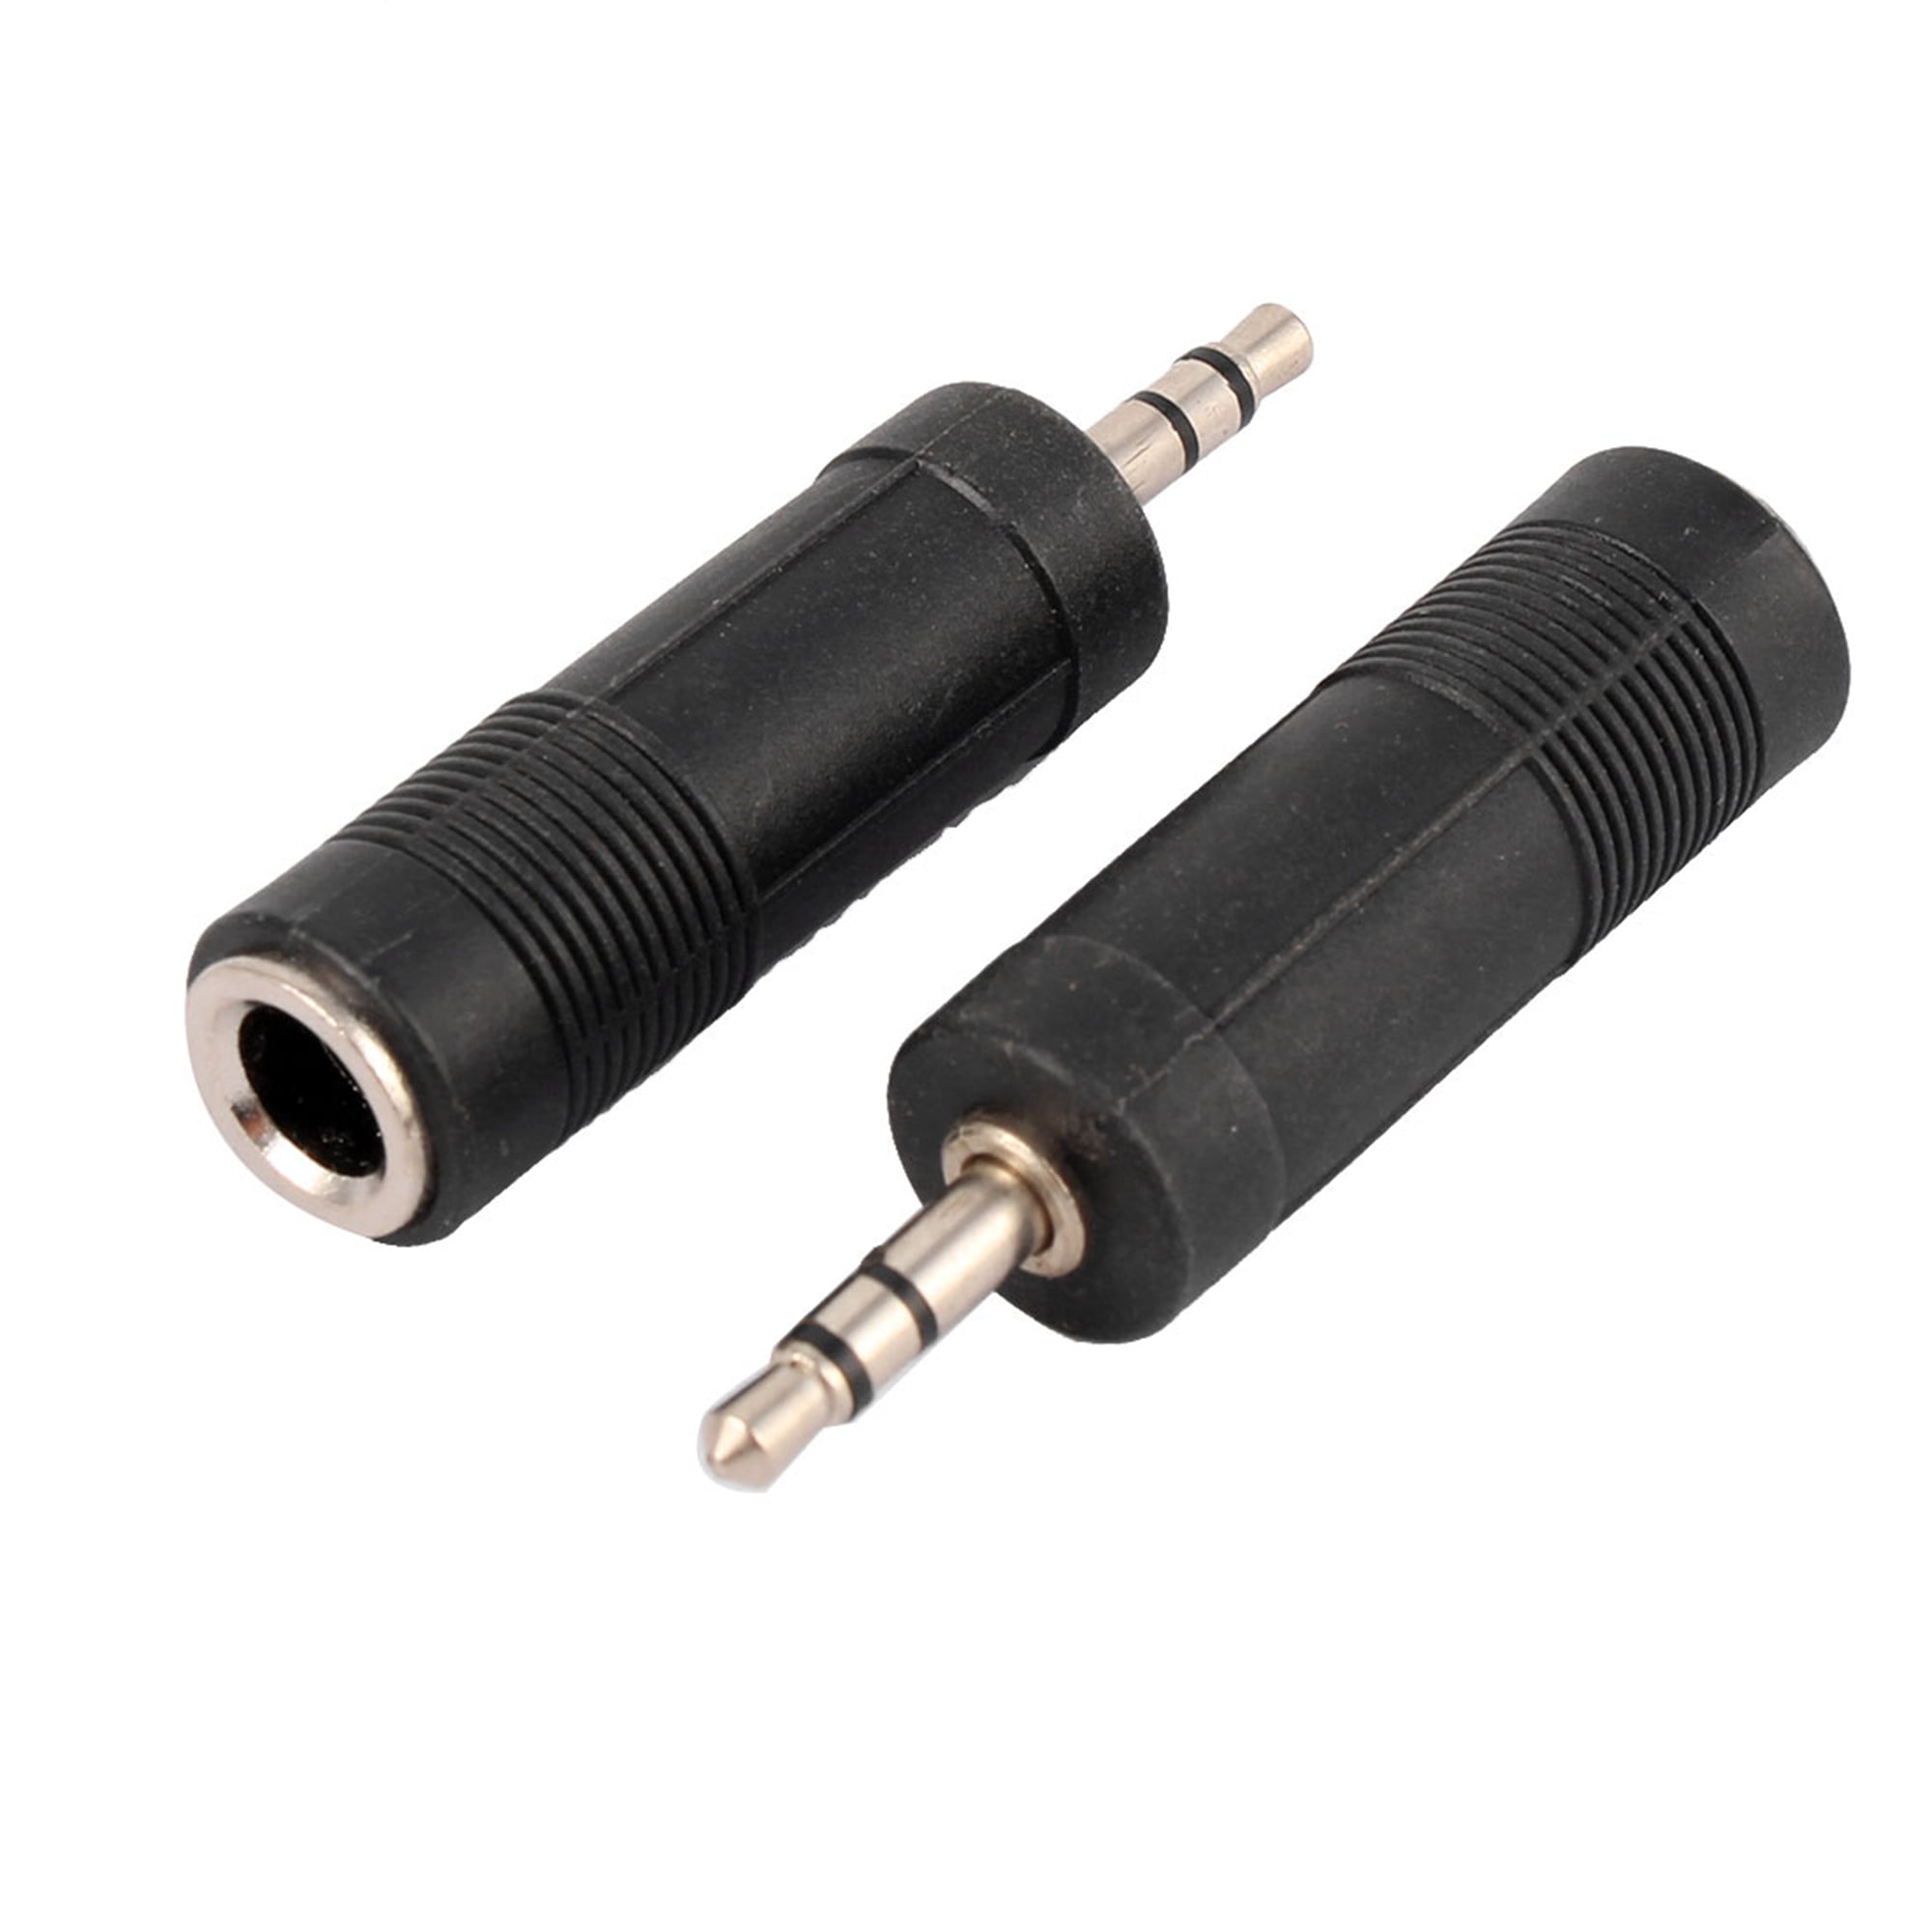 2X 3.5mm 1/8" Stereo Female Jack to 3.5mm Mono Male Plug Audio Converter Adapter